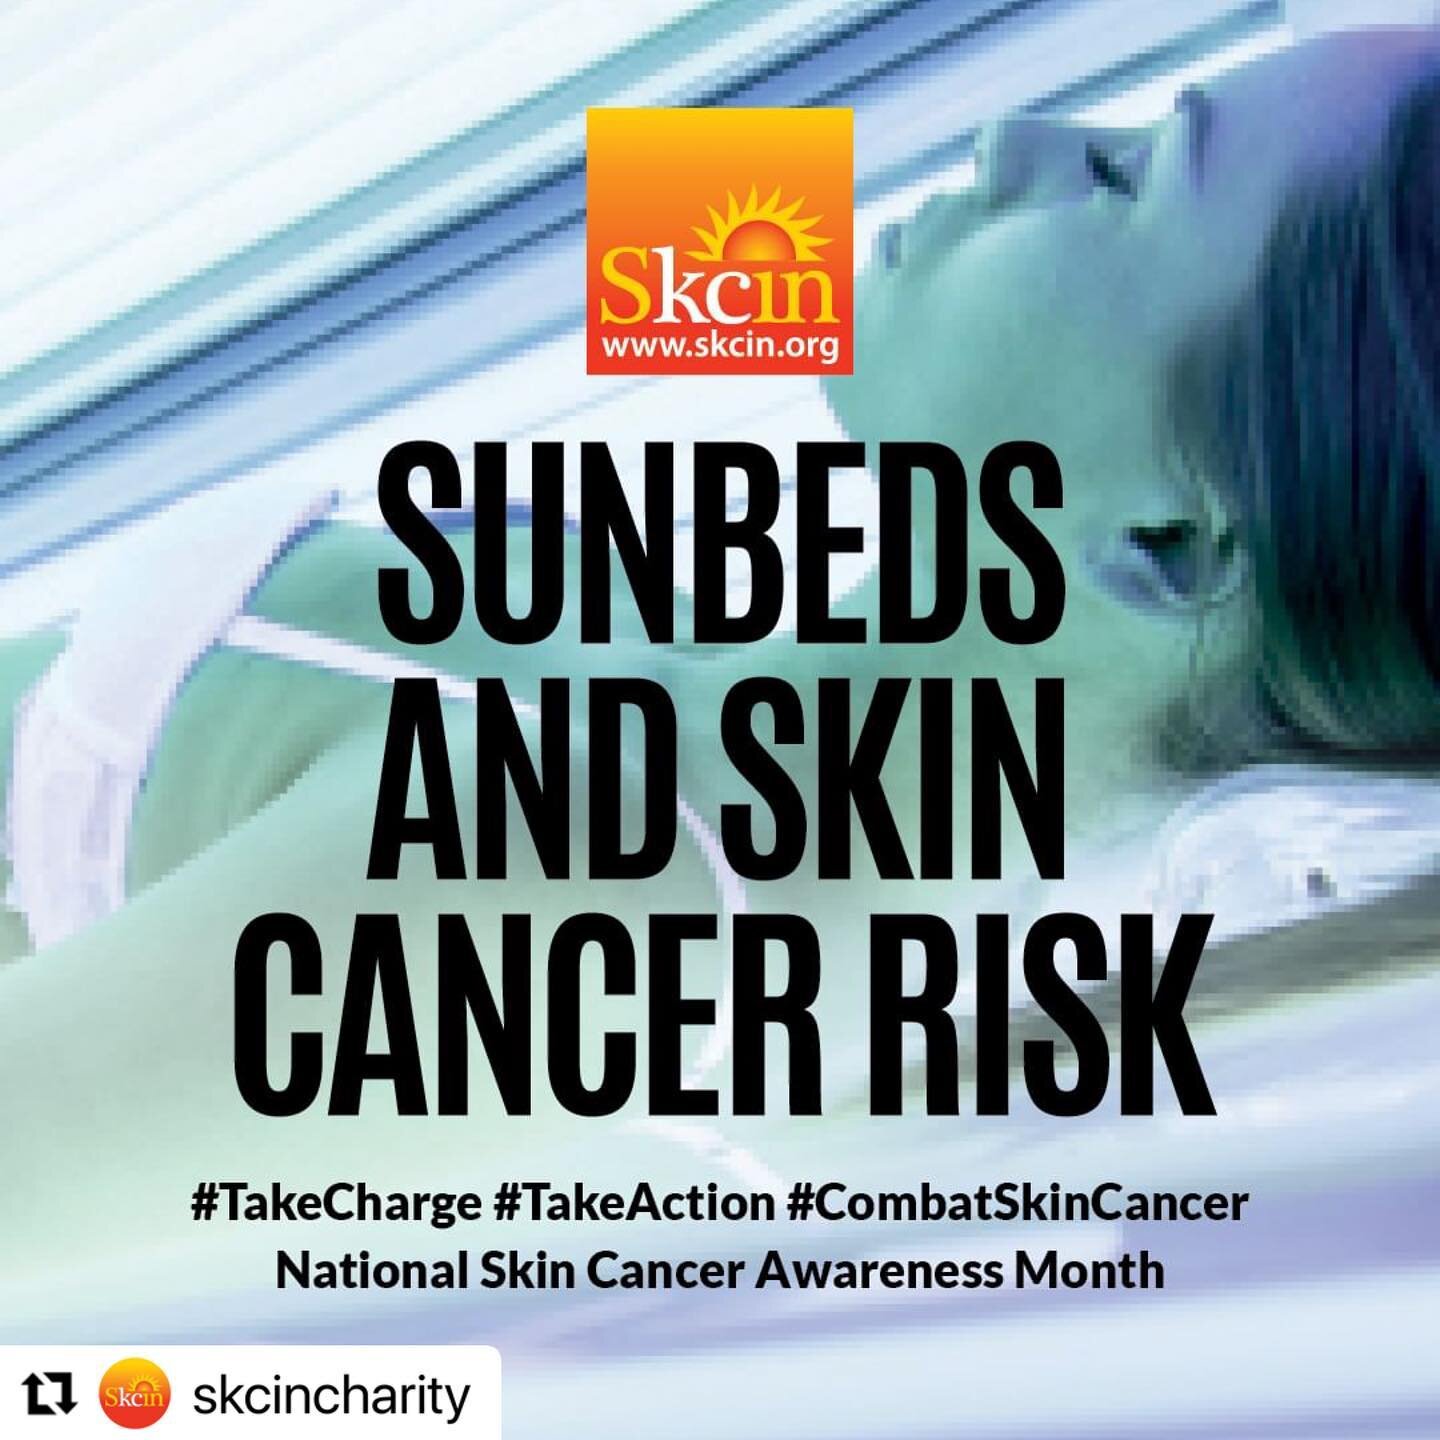 ・・・
SUNBEDS ARE CLASSIFIED AS A GROUP 1 CARCINOGEN - THEY CAUSE SKIN CANCER!

Even one sunbed session can more than double your risk of developing non-melanoma skin cancer - even more importantly is the increased risk of melanoma, the most serious fo